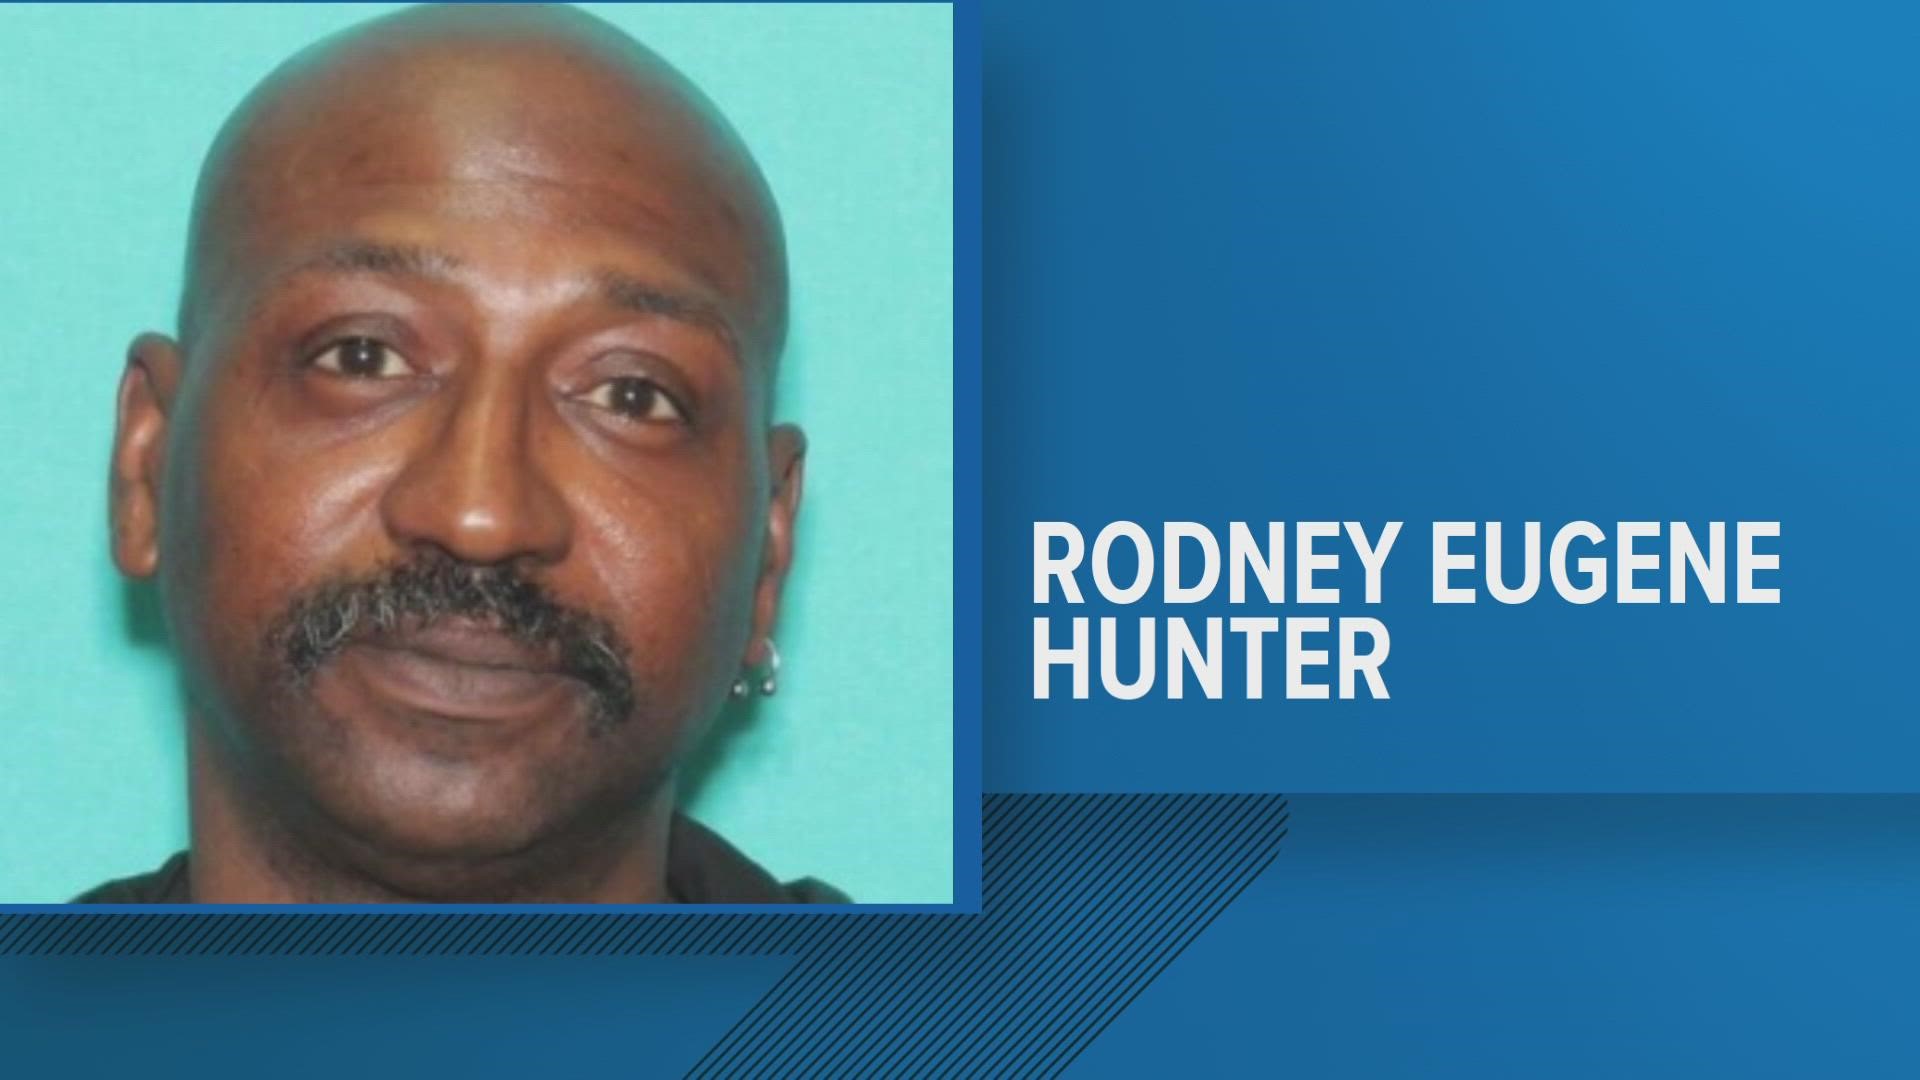 DPS announced that Rodney Eugene Hunter, 50, of Waco was arrested in the city on Aug. 9. He's described to be a "high-risk sex offender" by authorities.